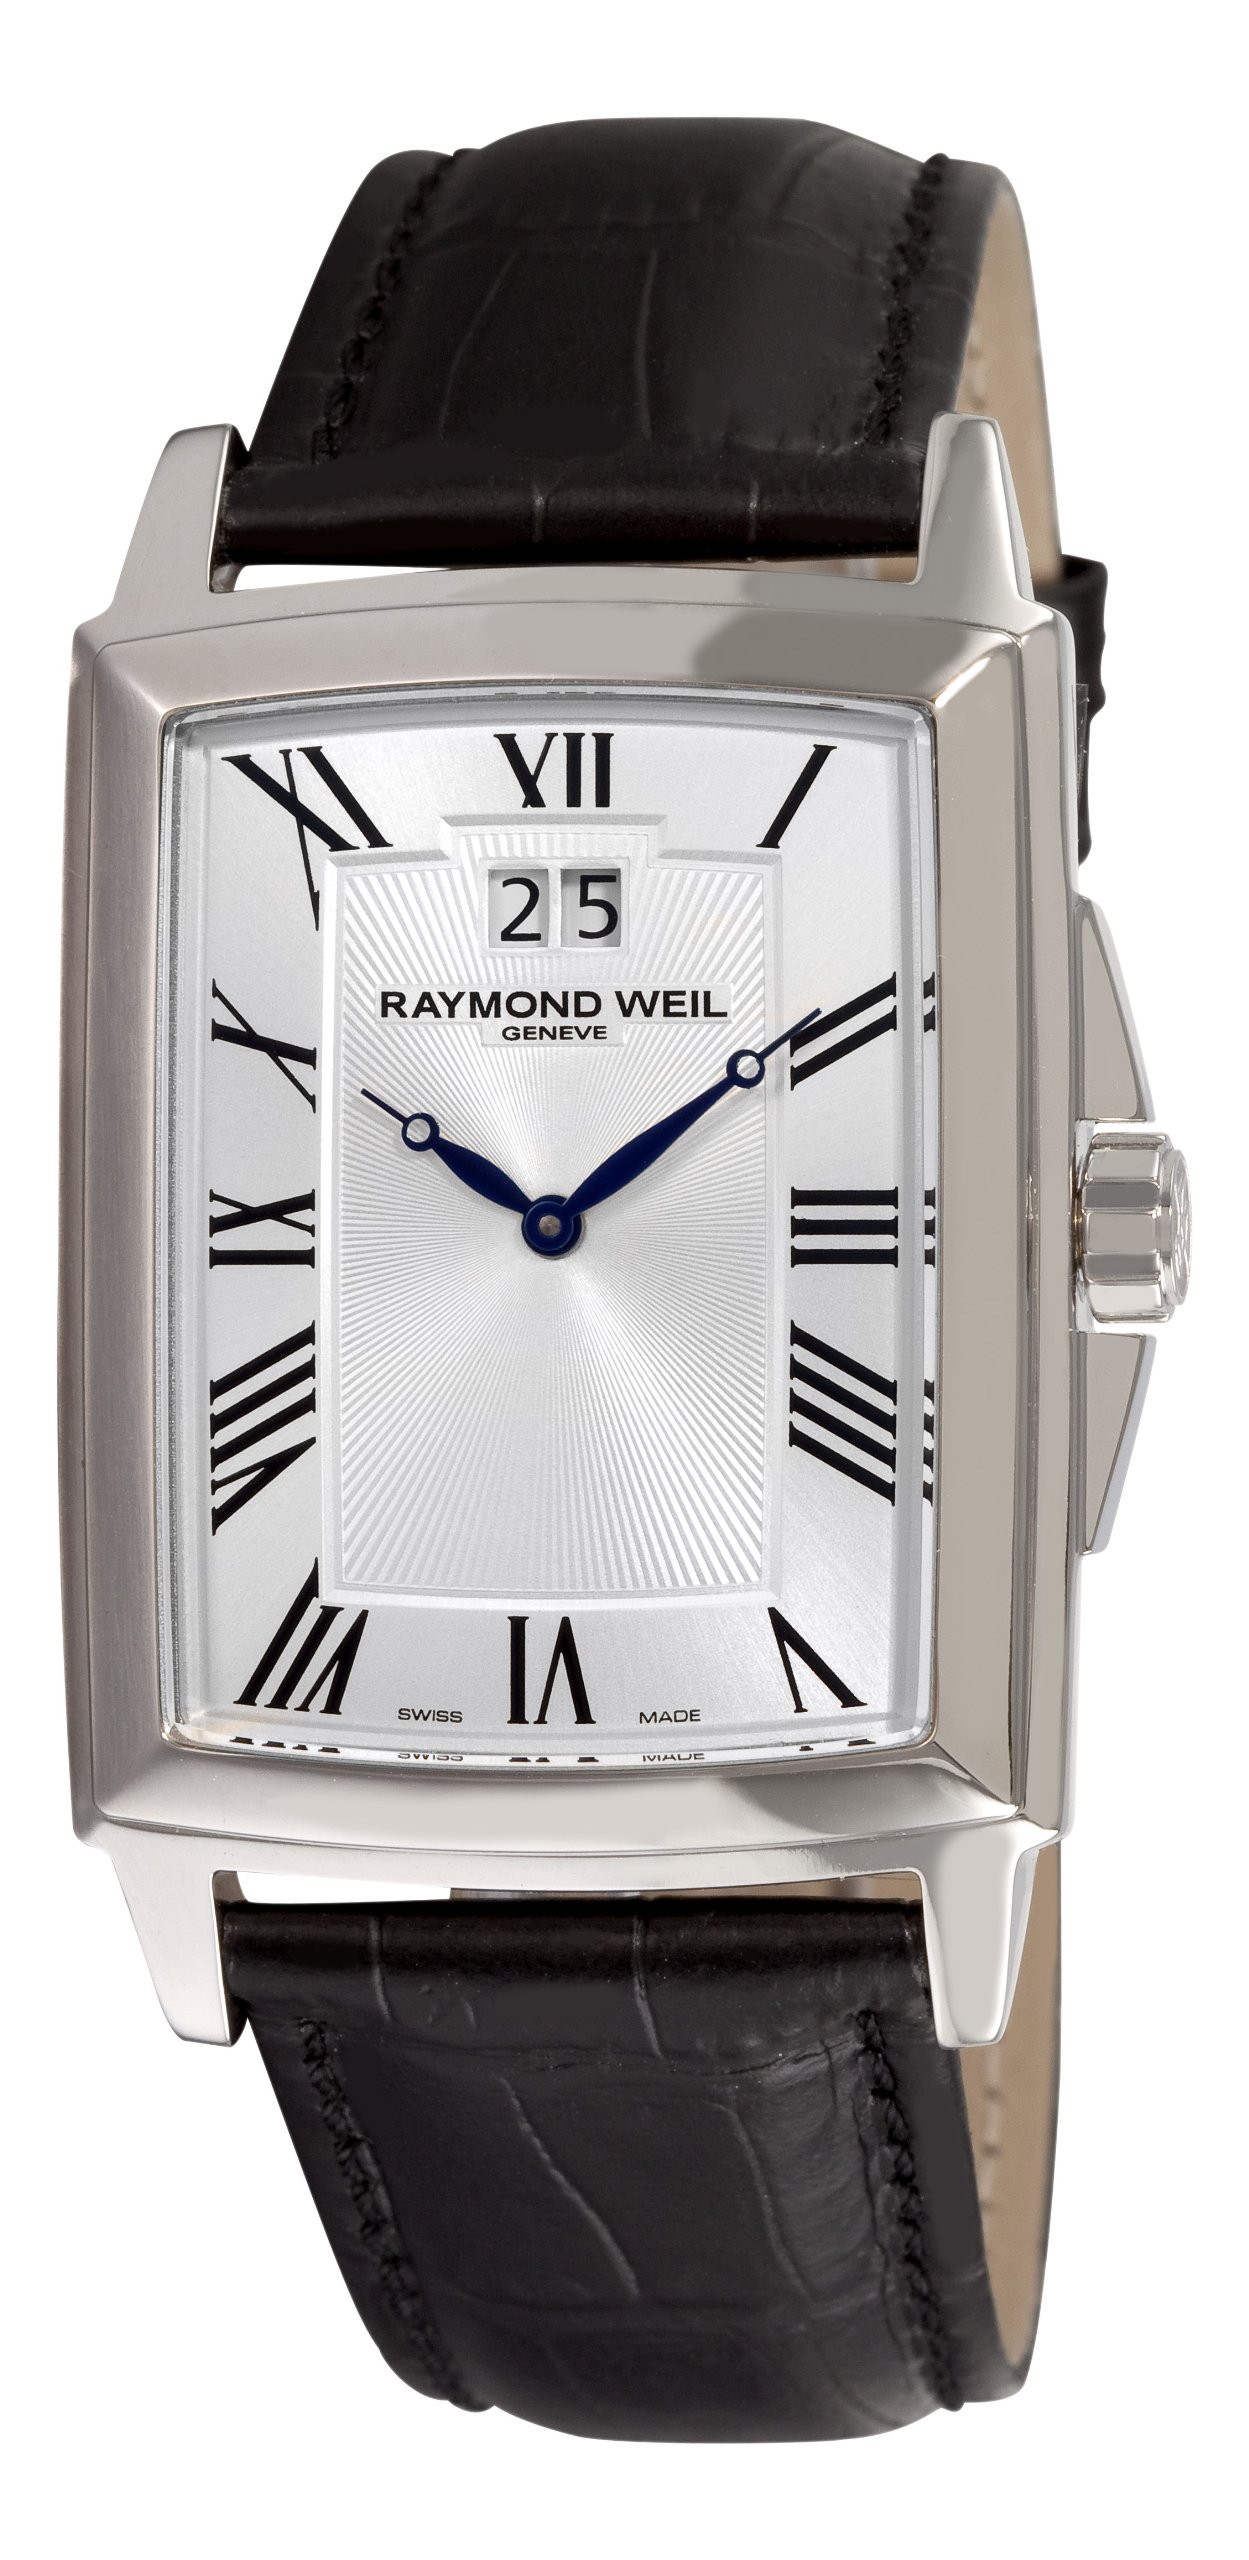 RAYMOND WEIL Men's 5596-STC-00650 Tradition Silver Roman Numerals Dial Watch